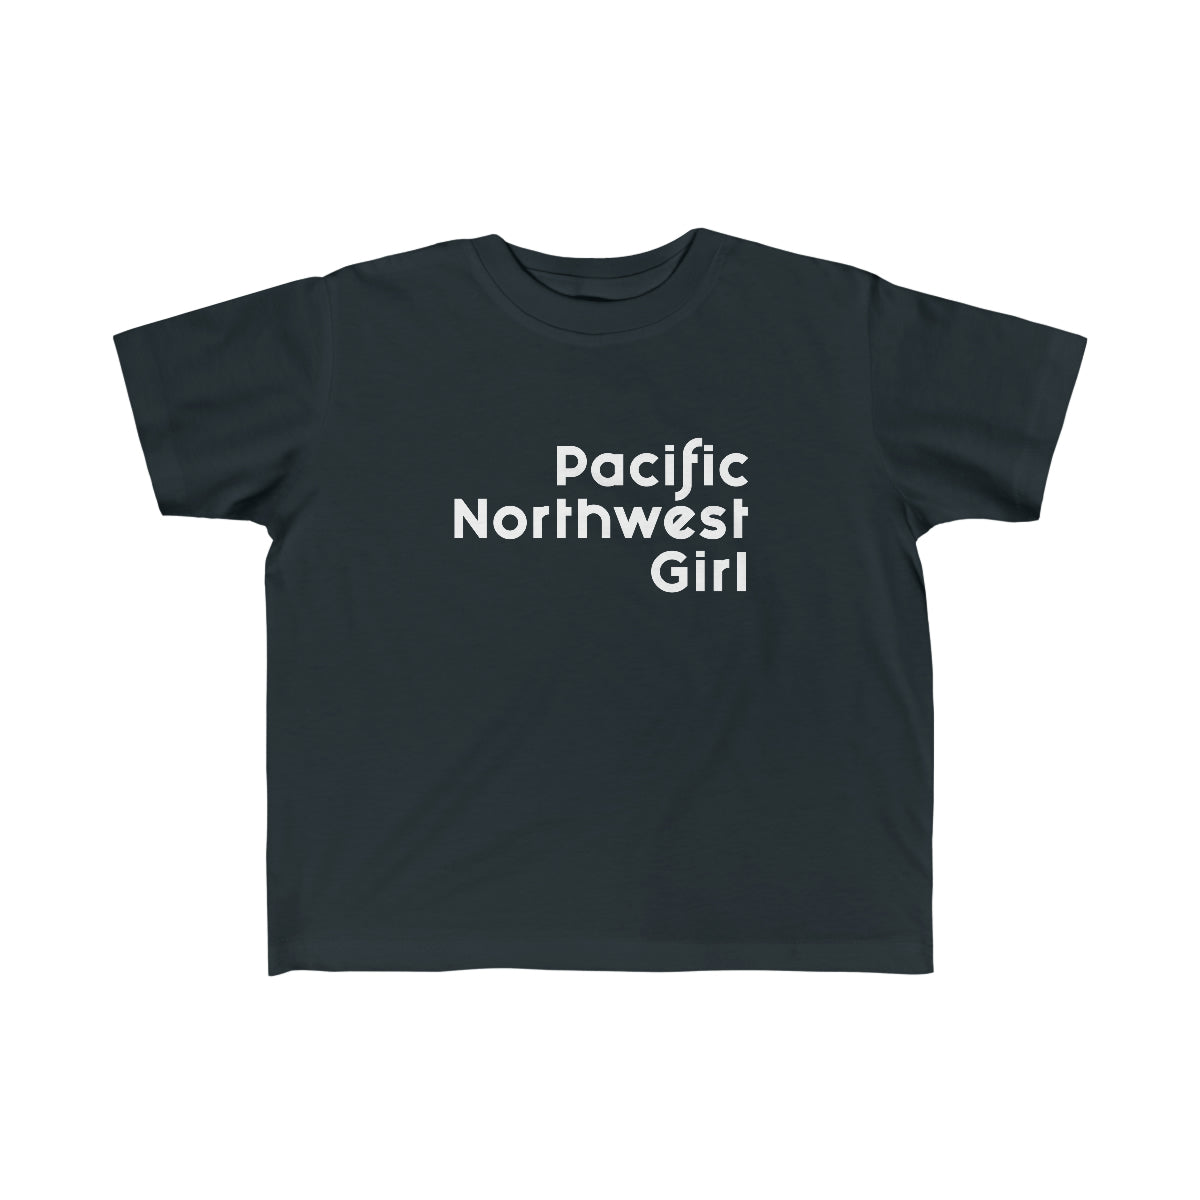 Pacific Northwest Girl Toddler Tee Black / 2T - The Northwest Store